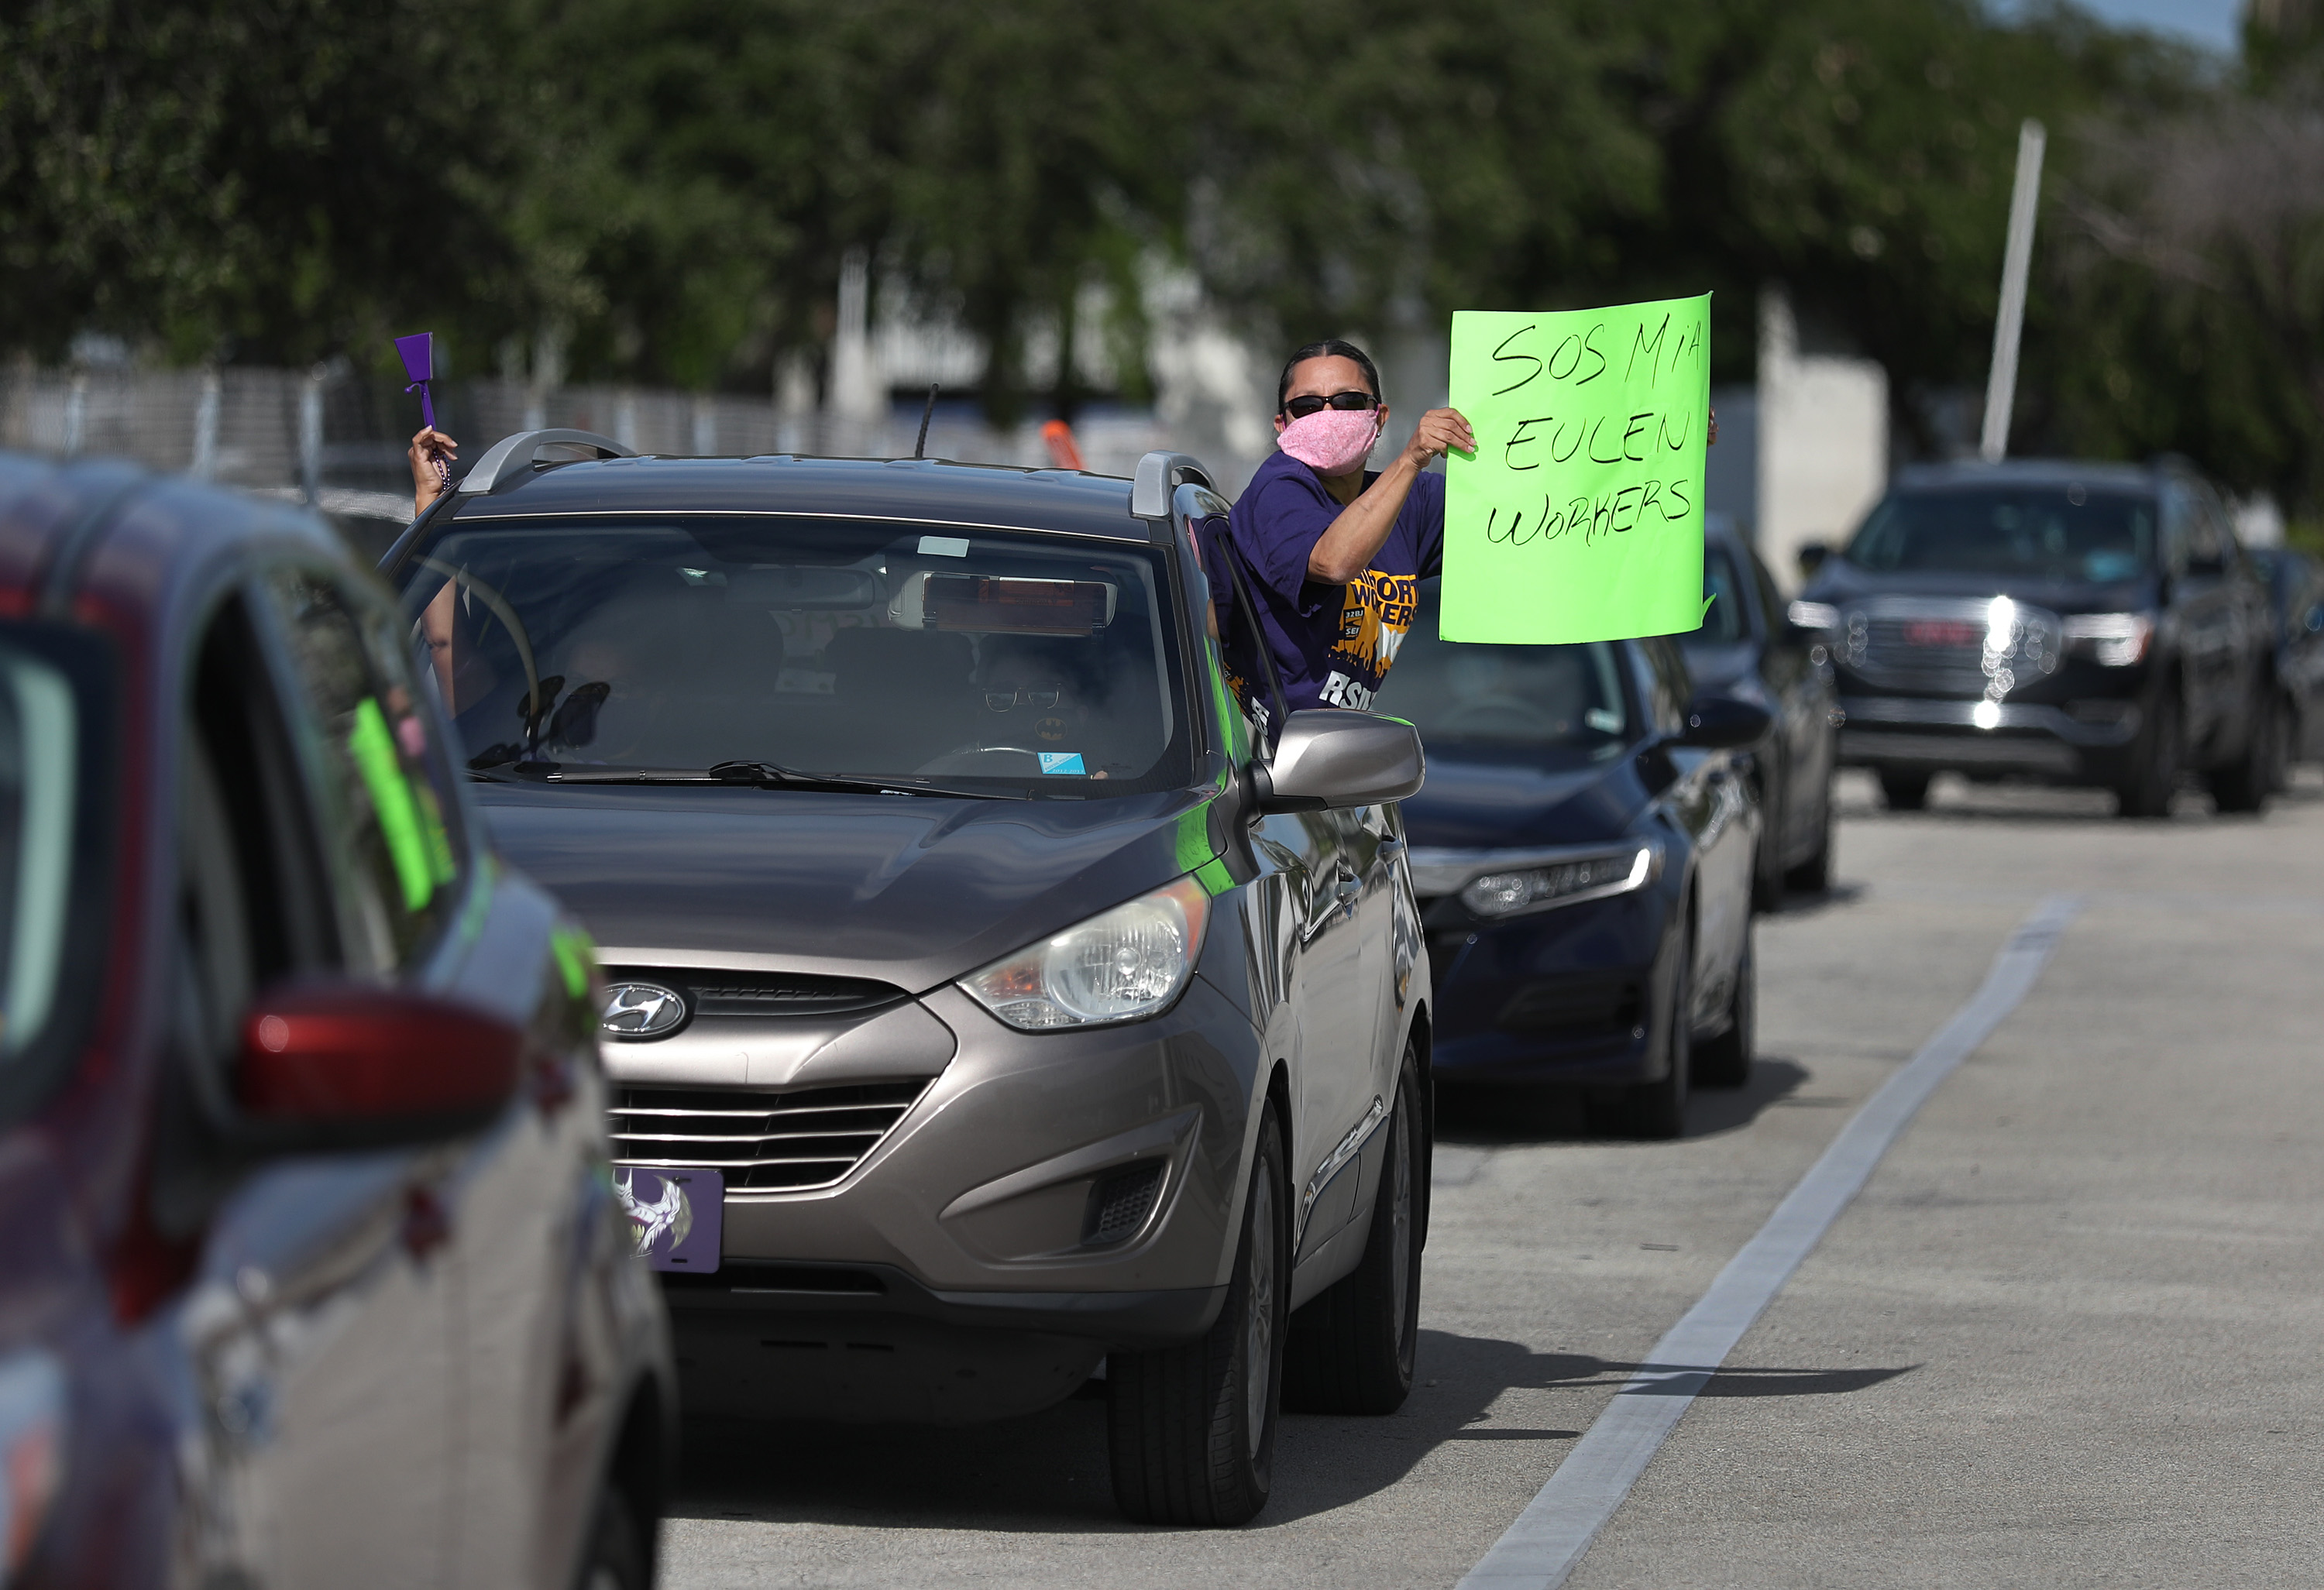 A protester at Miami International Airport on May 12, 2020, where workers were demonstrating against layoffs by the Eulen America aviation company. (Joe Raedle—Getty Images)